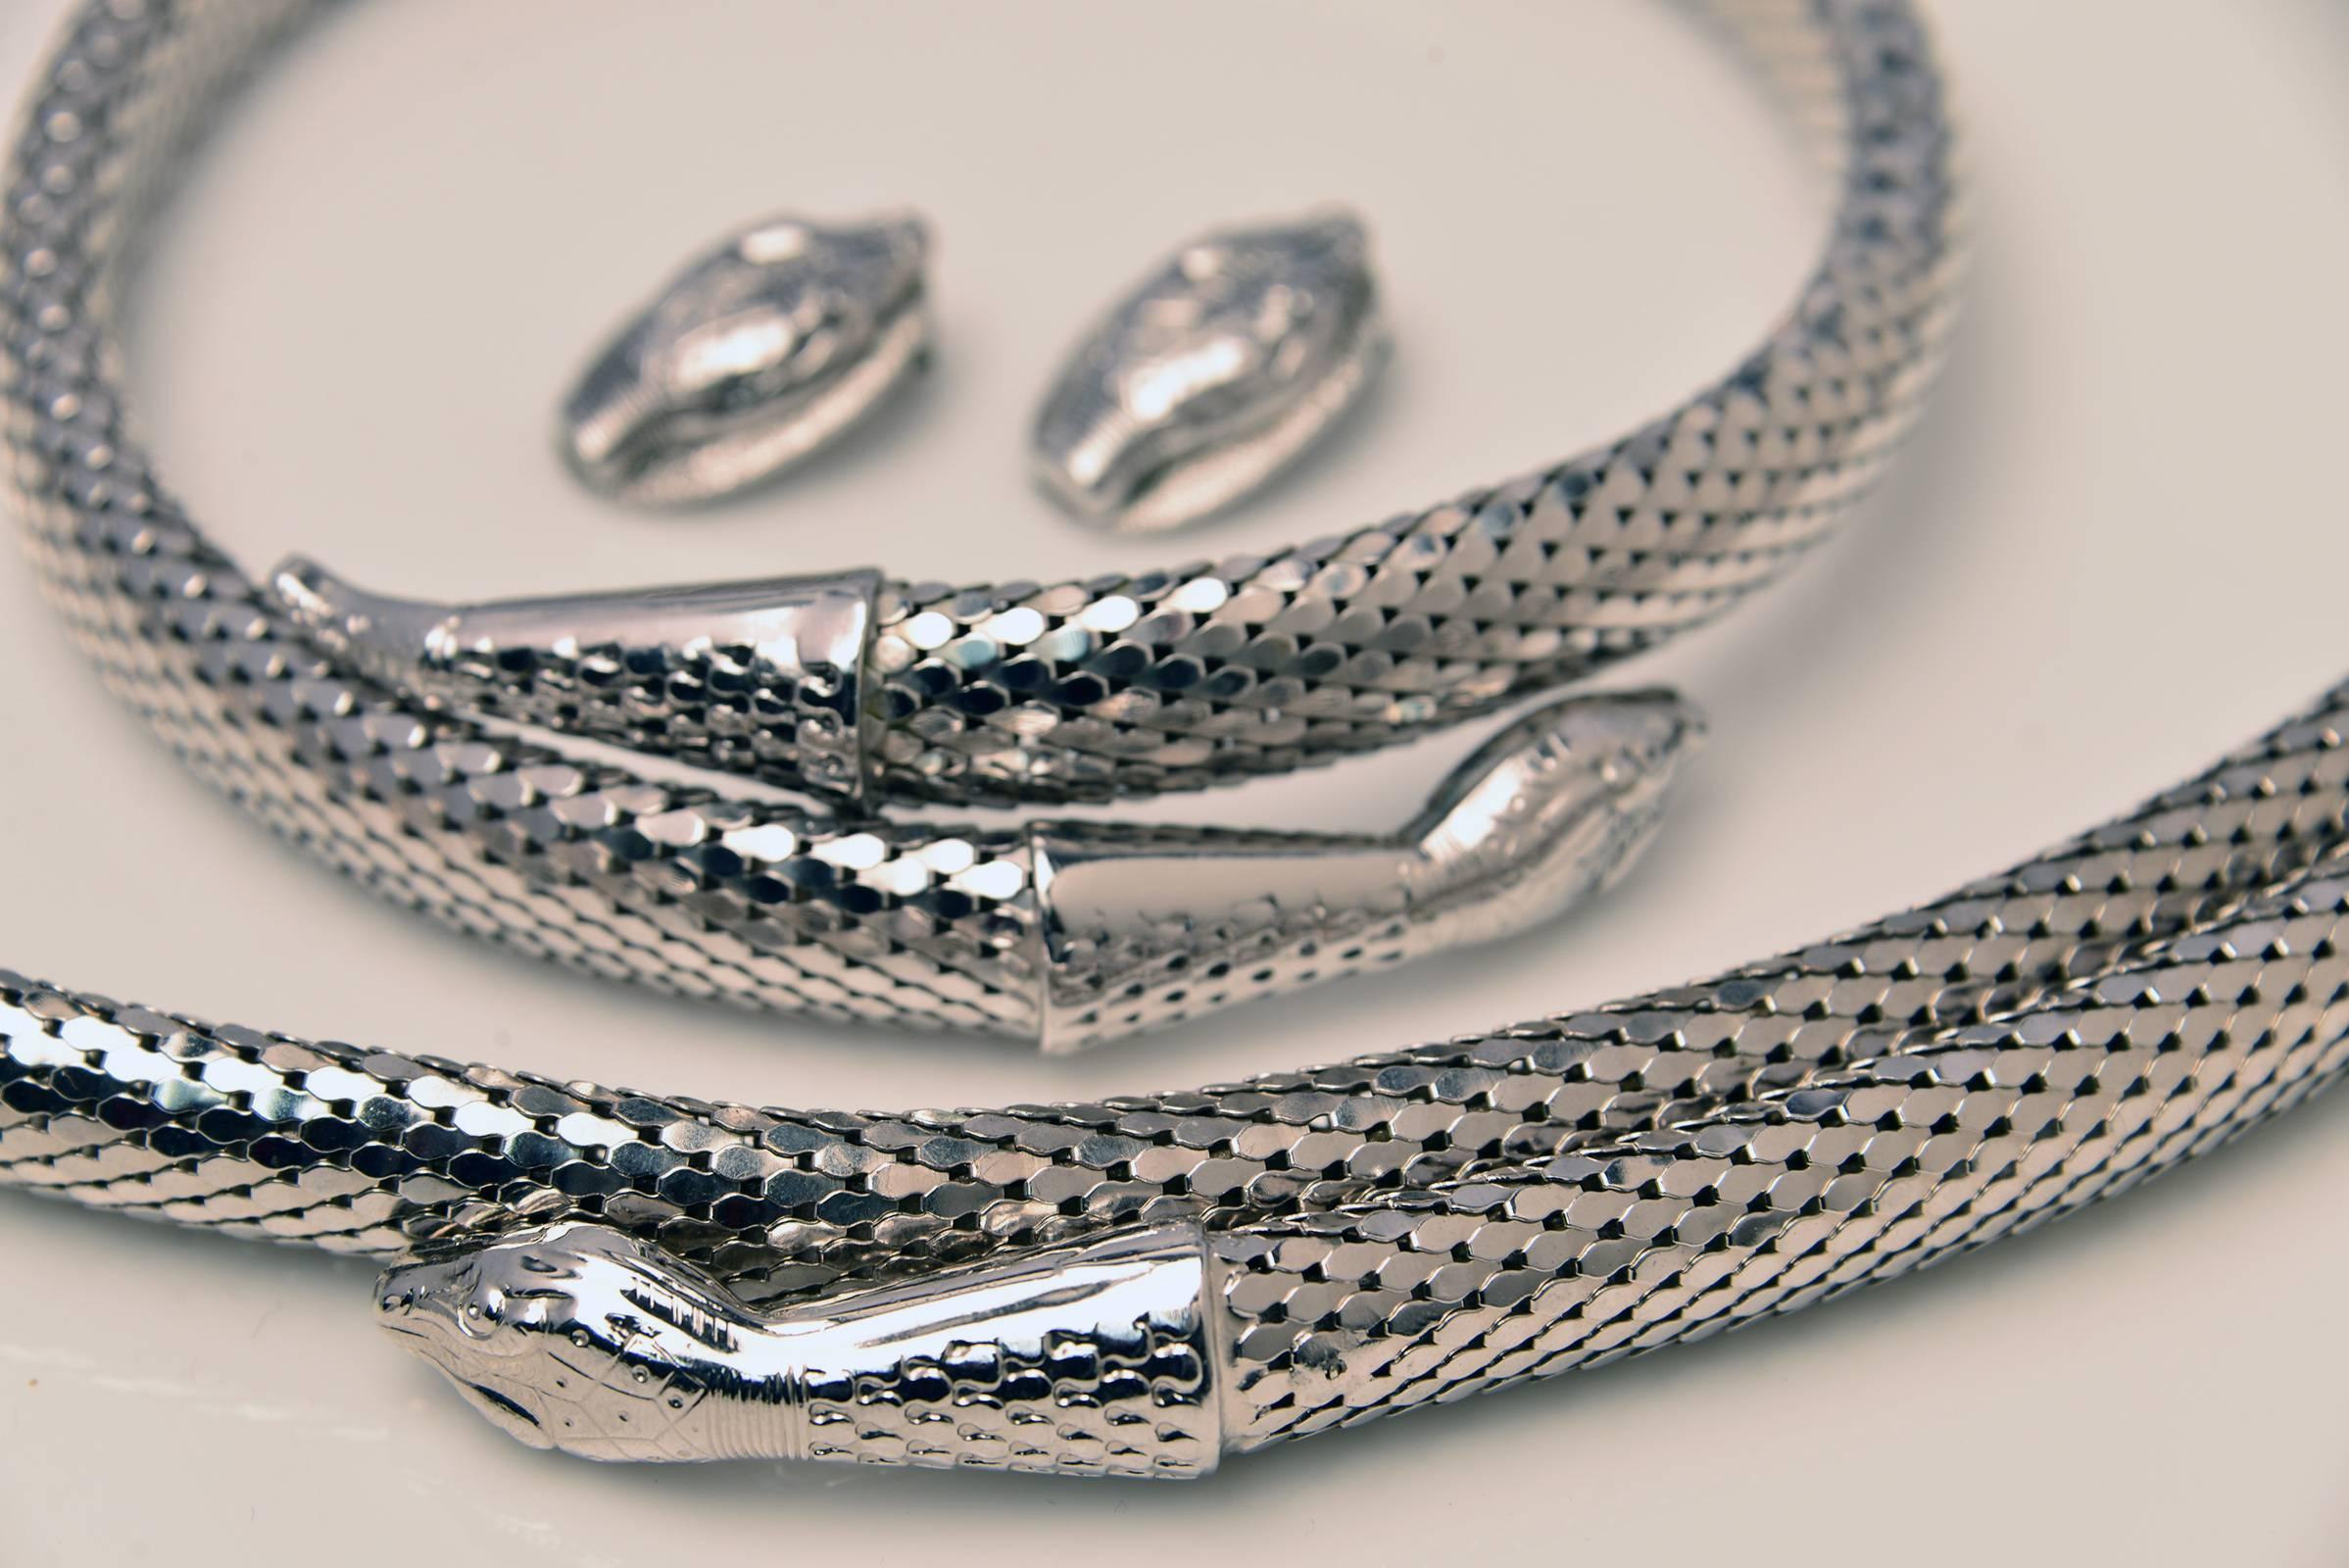 
Wonderful Whiting and Davis Snake coil choker, earrings, and belt are magnificent. Thick, round, weighted silver mesh.  The body is gleaming in silver.  The snake head is engraved in Egyptian inspired style. This style was part of the Cleopatra